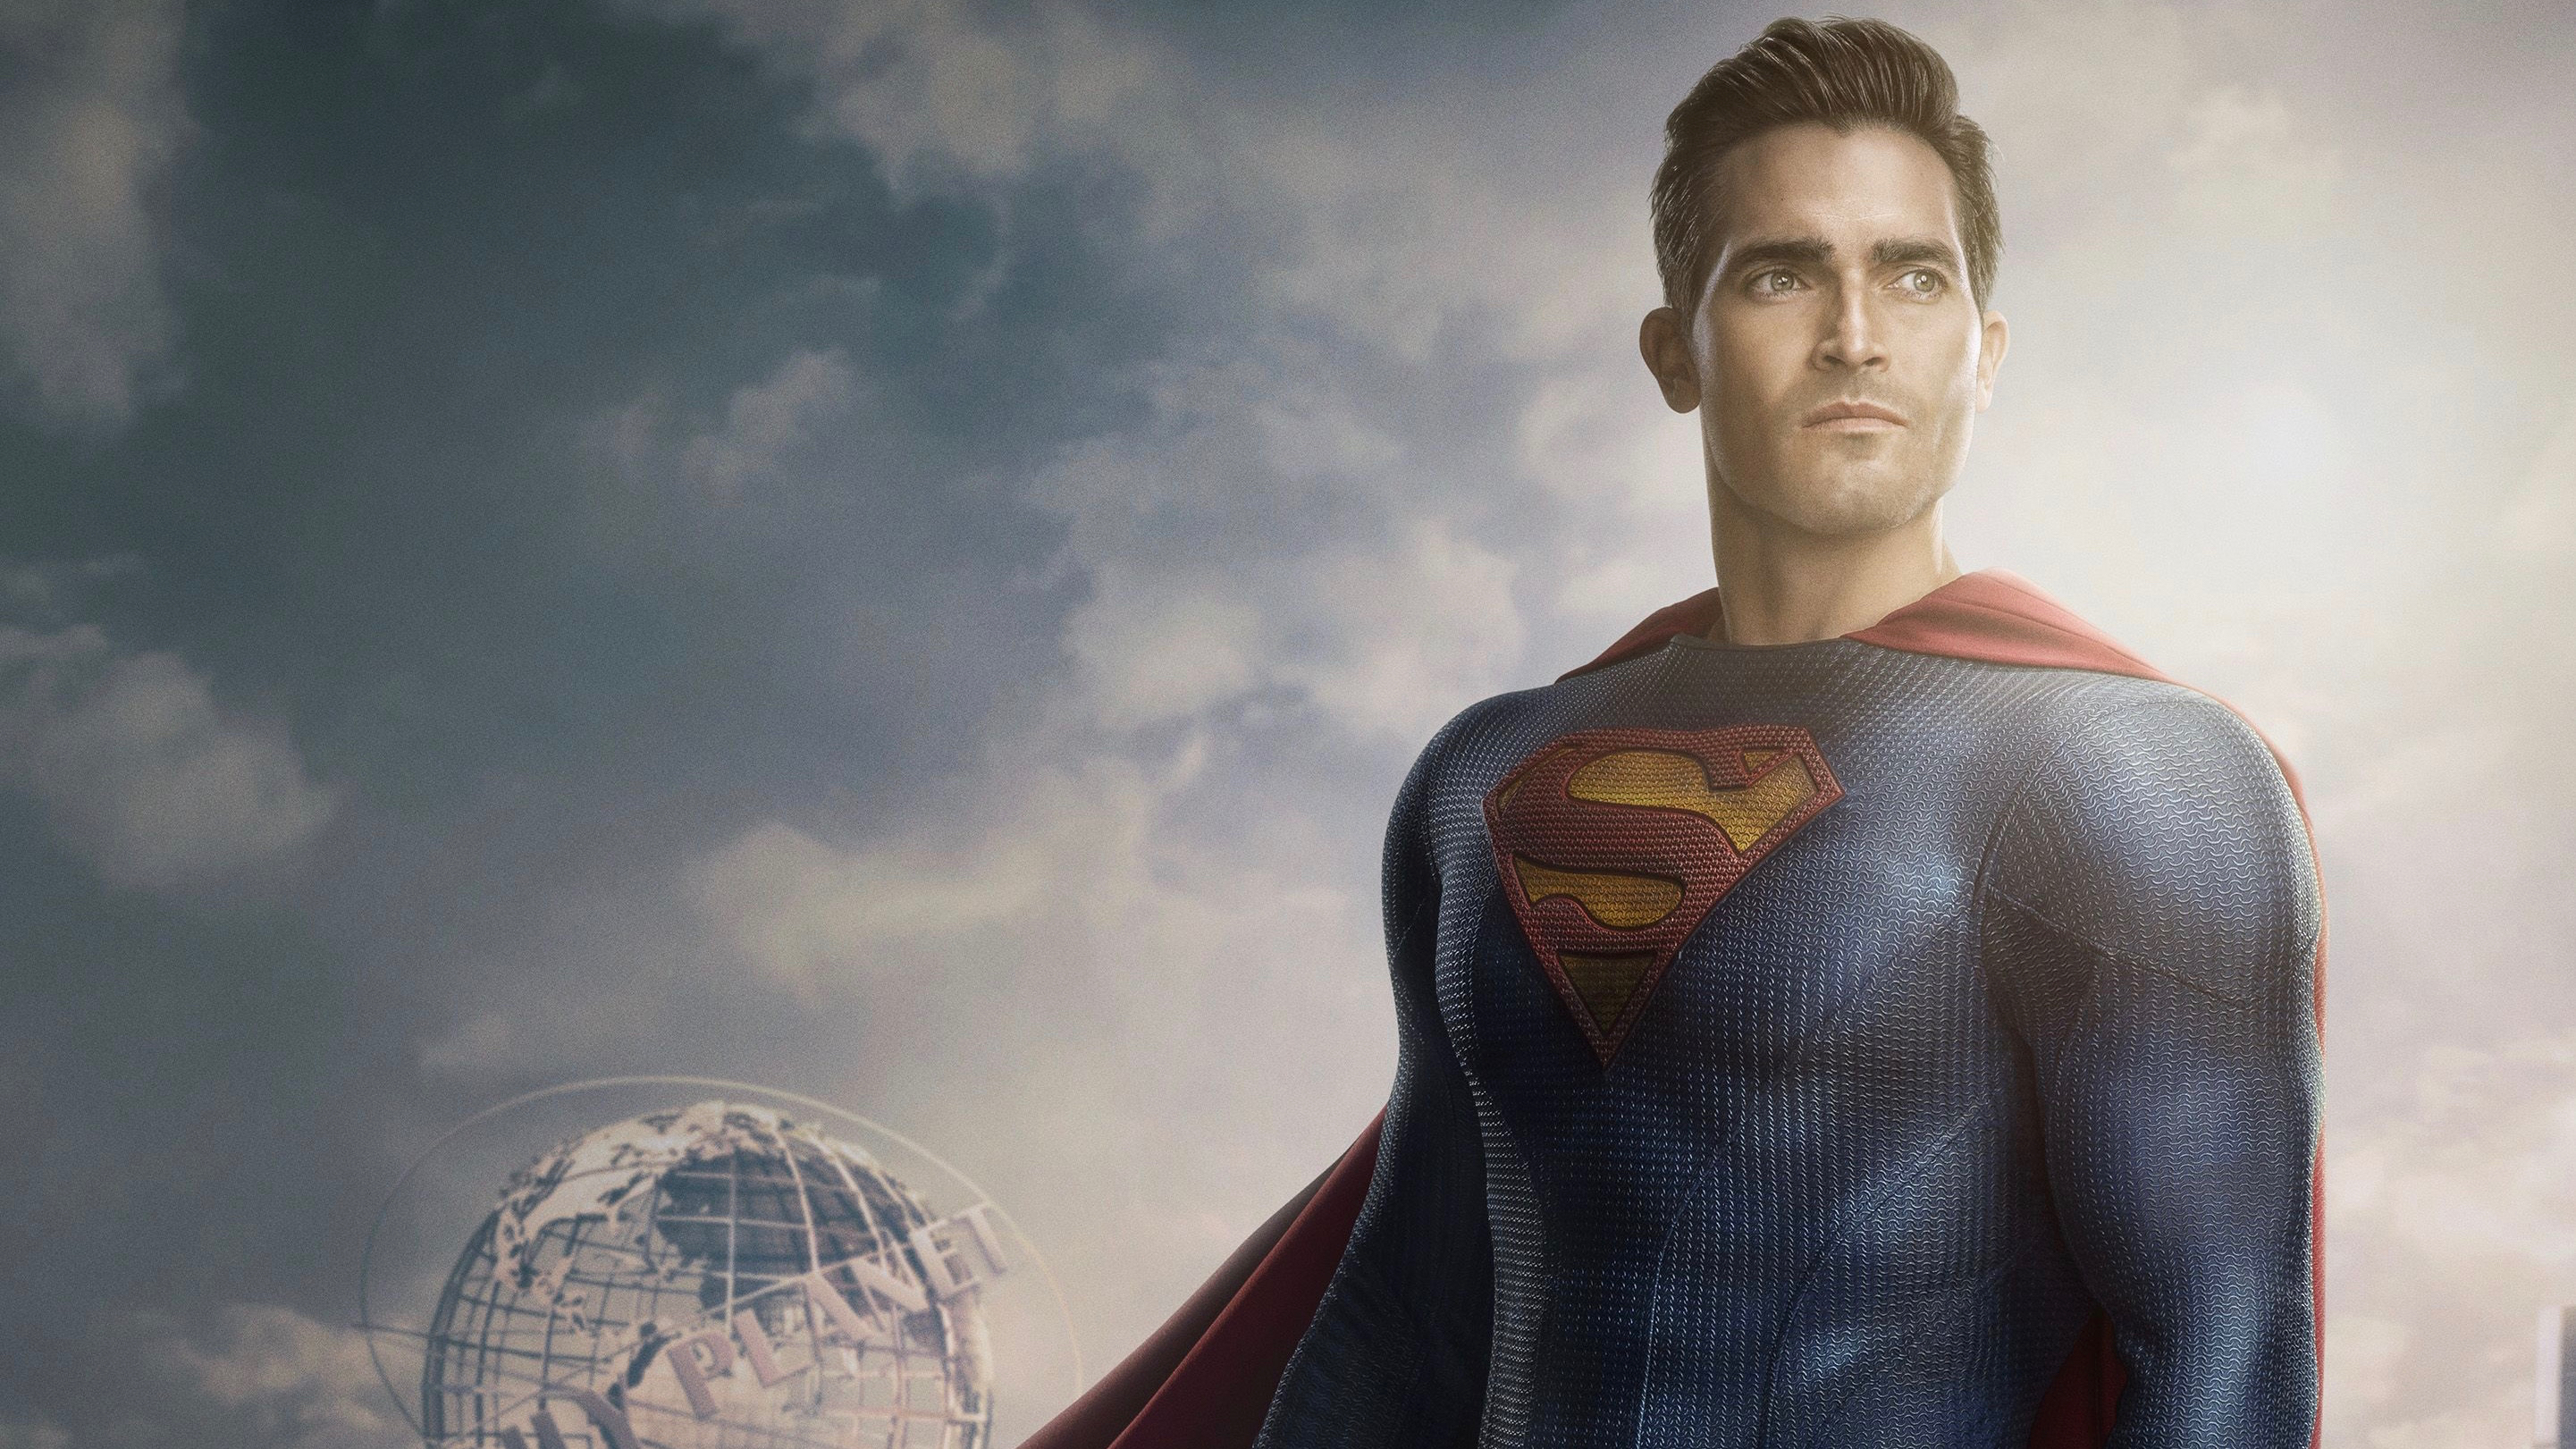 2882x1621 50+ Superman and Lois HD Wallpapers and Backgrounds